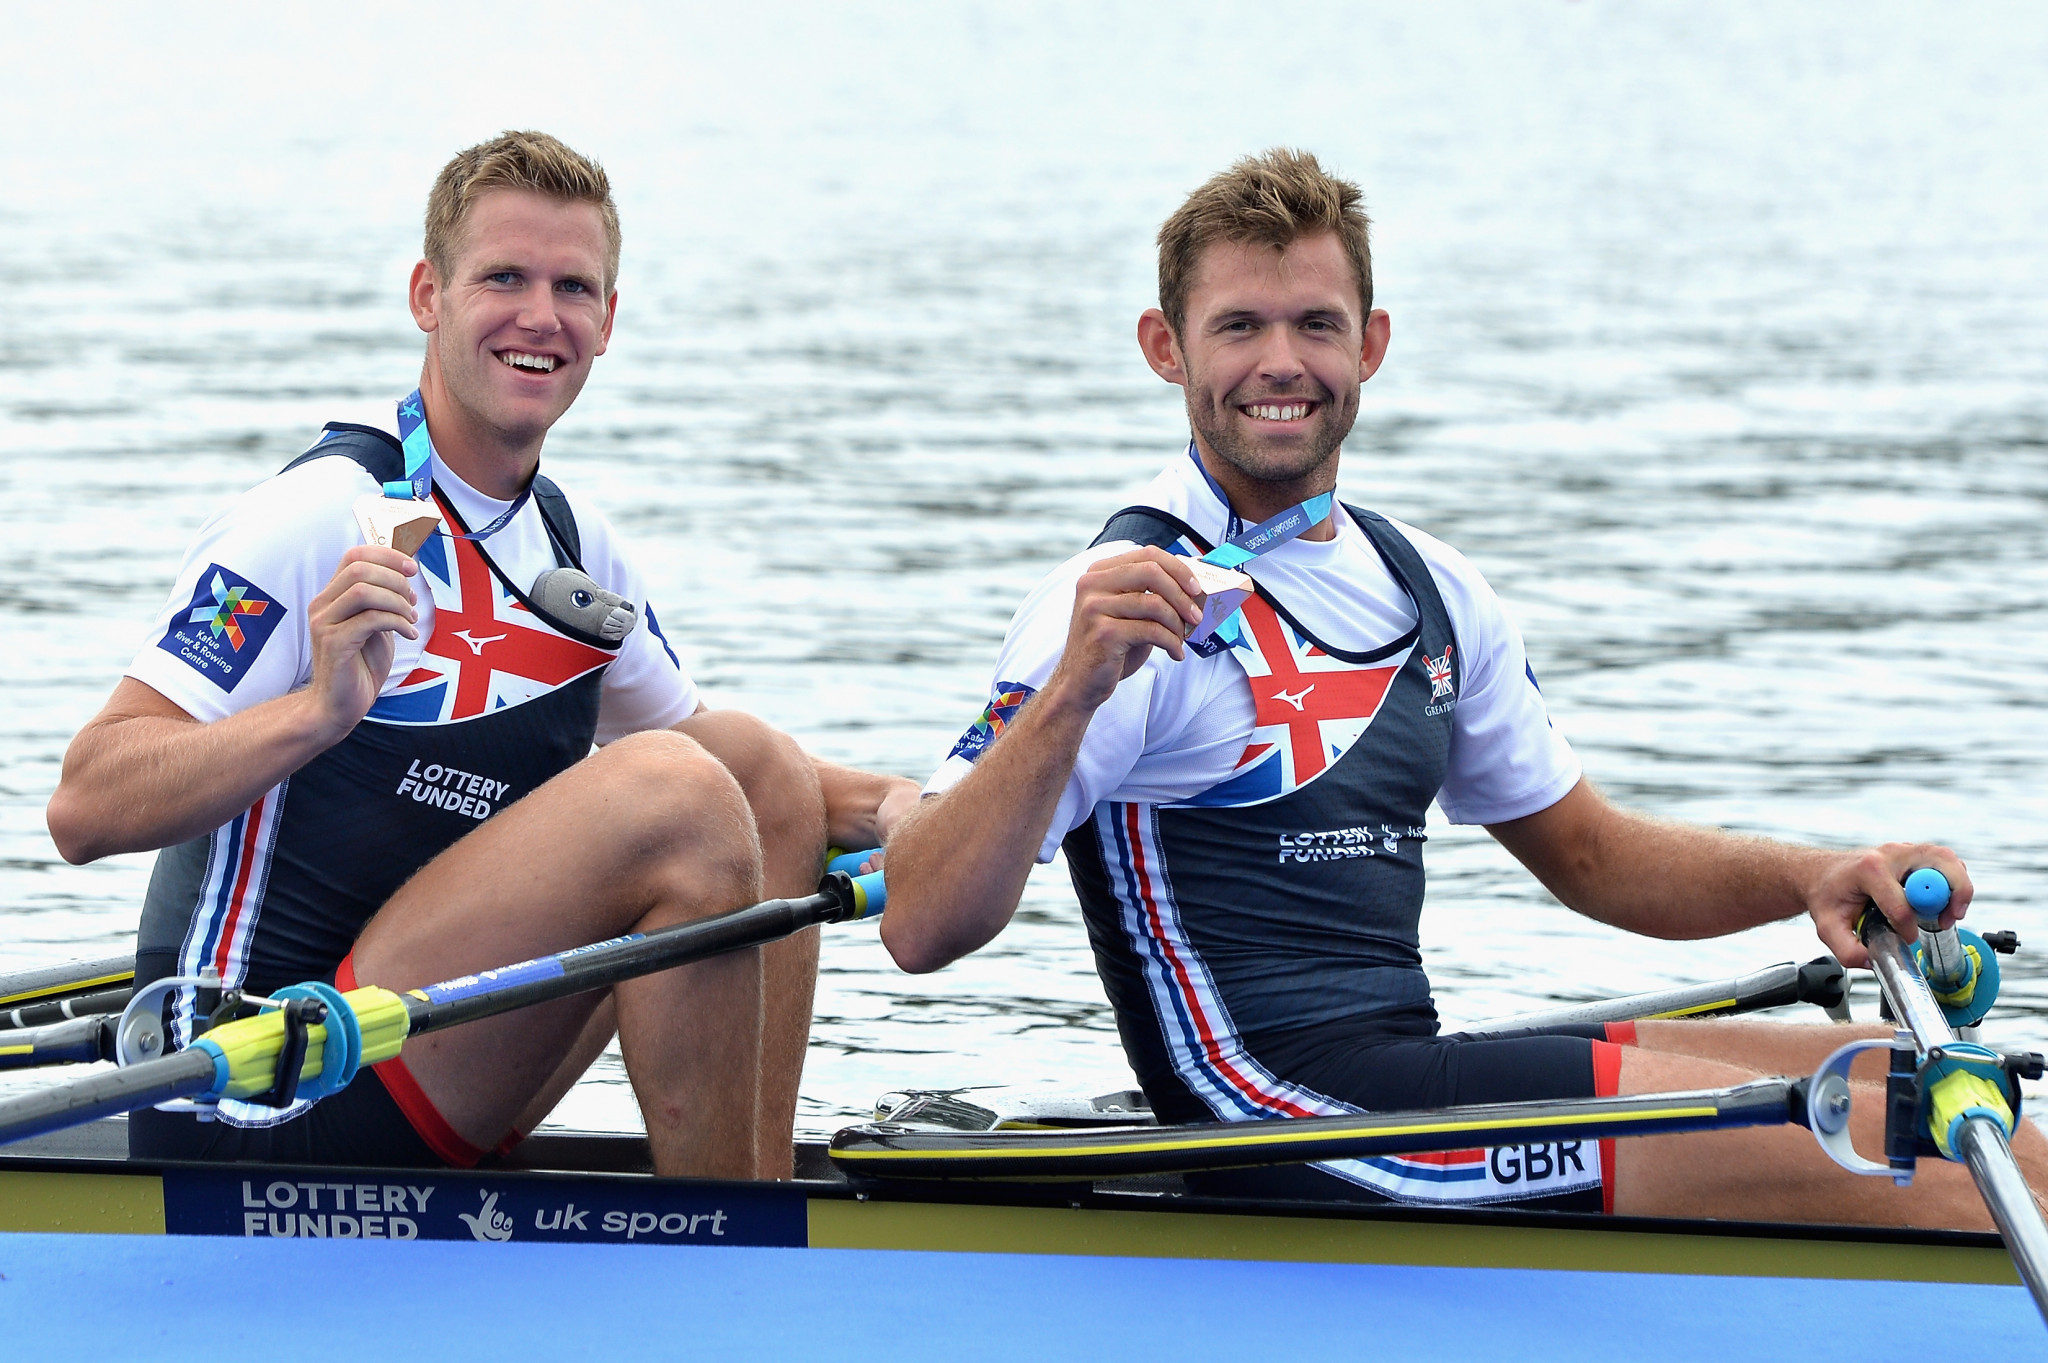 British Rowing is responsible for the training and selection of athletes to represent Great Britain at international championships ©Getty Images